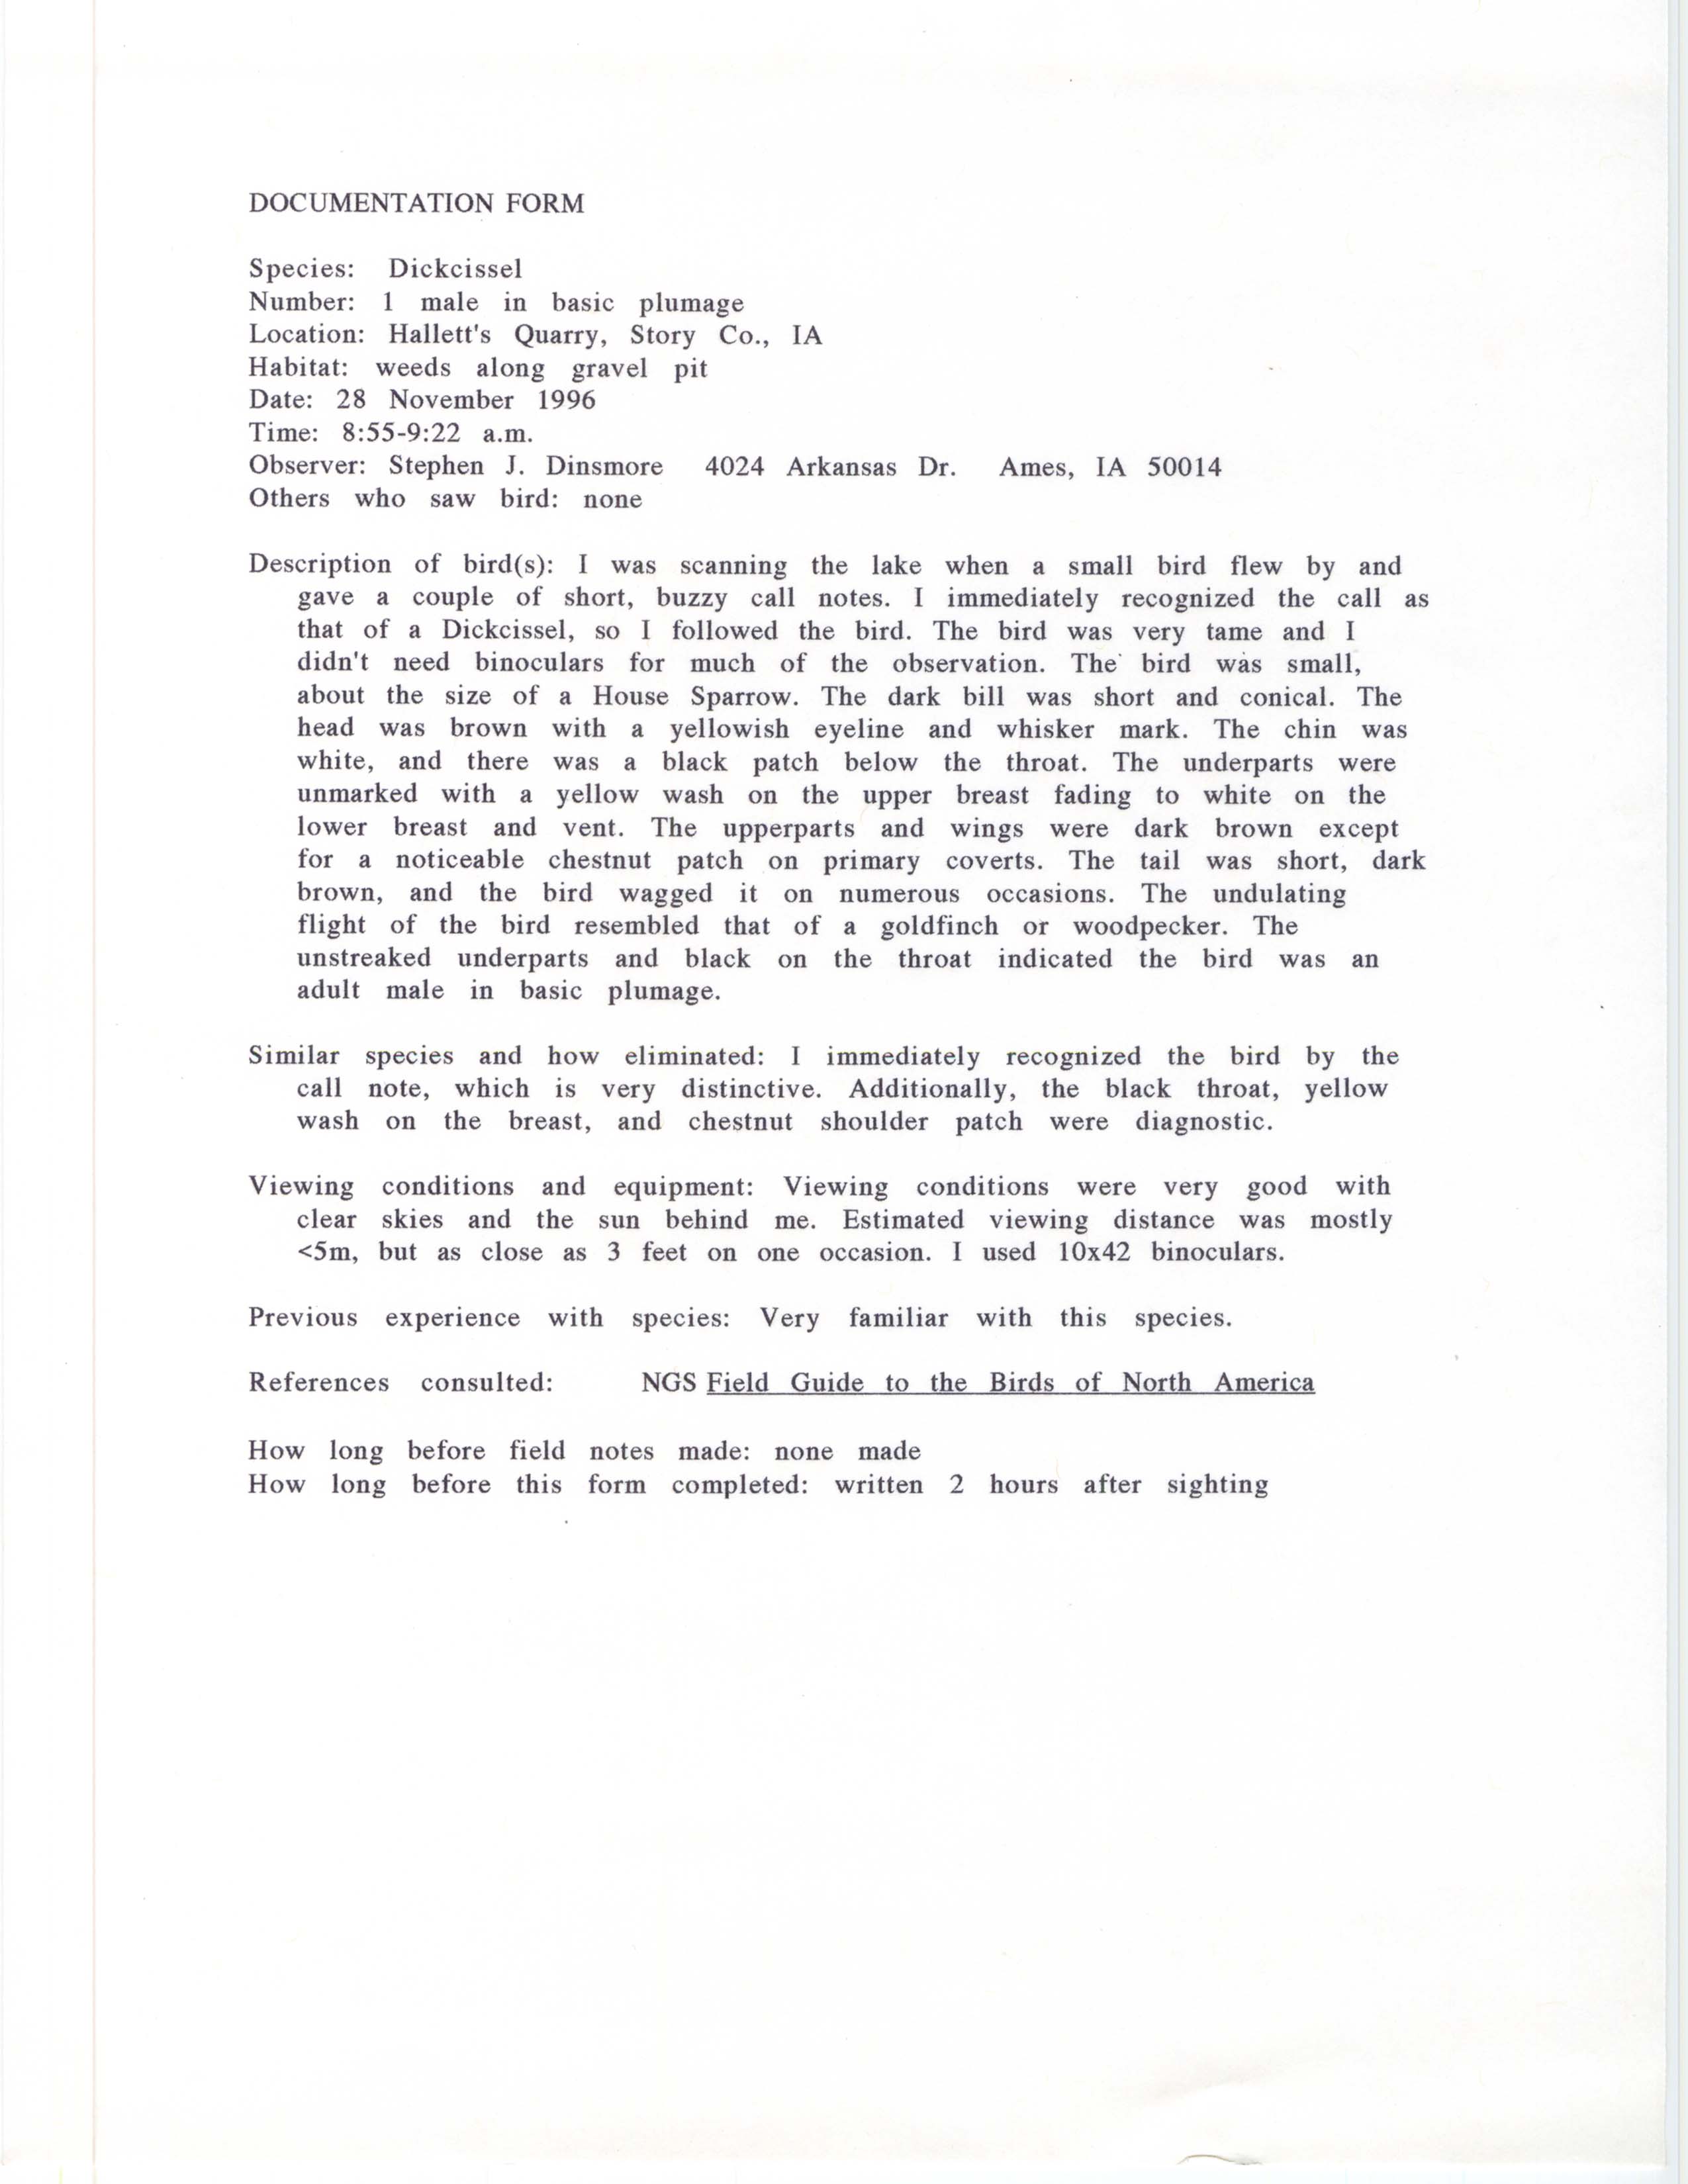 Rare bird documentation form for Dickcissel at Hallet's Quarry at Ames, 1996